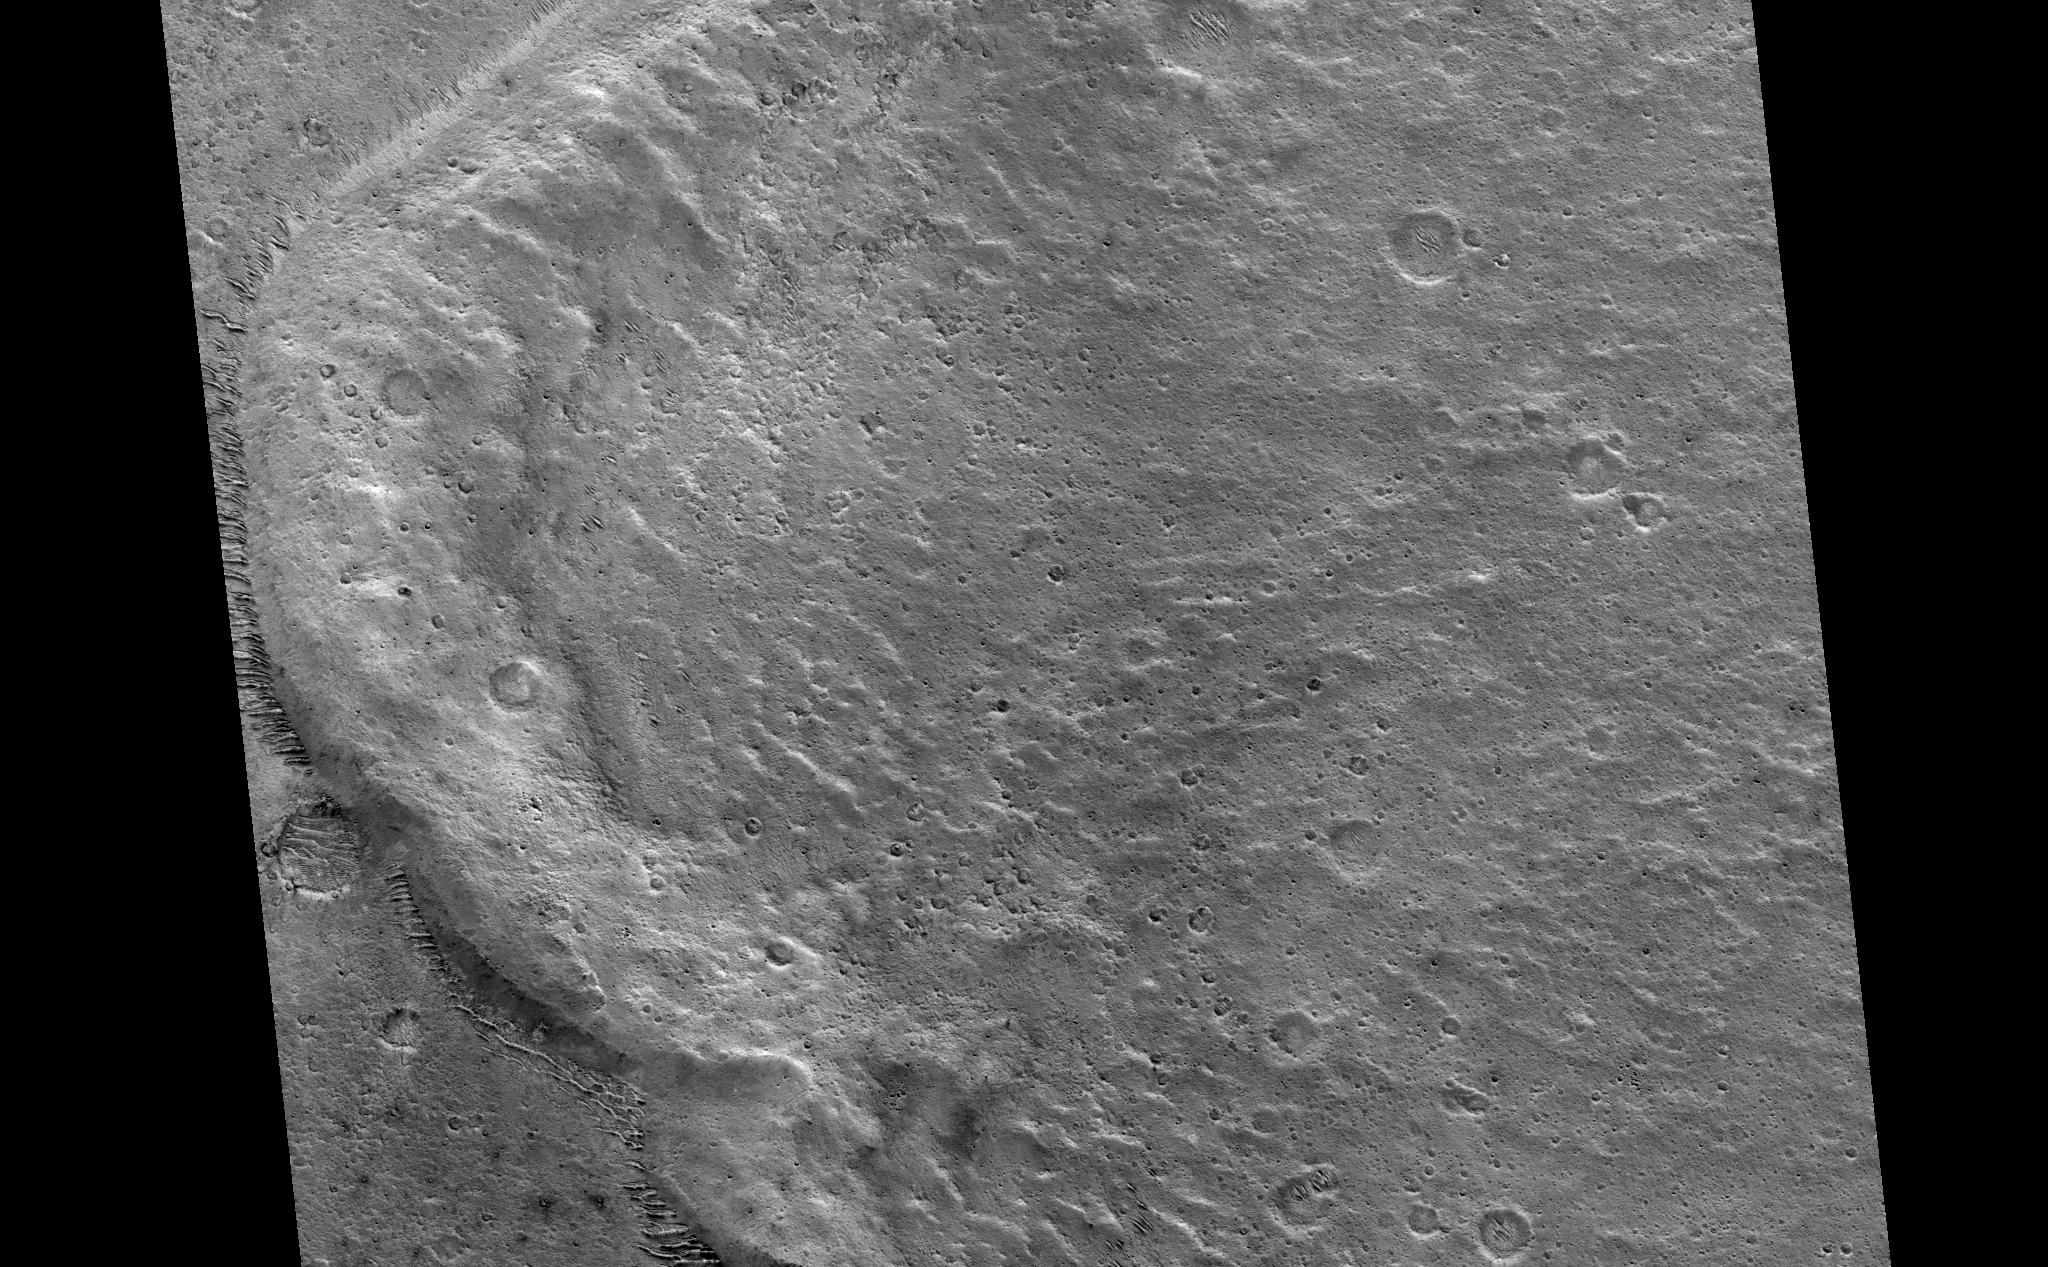 Impact craters on Mars are kind of neat. Many of them look very different than impact craters seen on Earth's moon or Mercury. Fresh lunar and Mercurian craters have ejecta blankets that look a bit rough near the crater rims; around larger craters, long rays or chains of secondary craters radiate away from the crater rims. Some Martian craters are similar to these craters, but Mars also has a high proportion of craters with forms not found on the moon or Mercury: rampart craters.